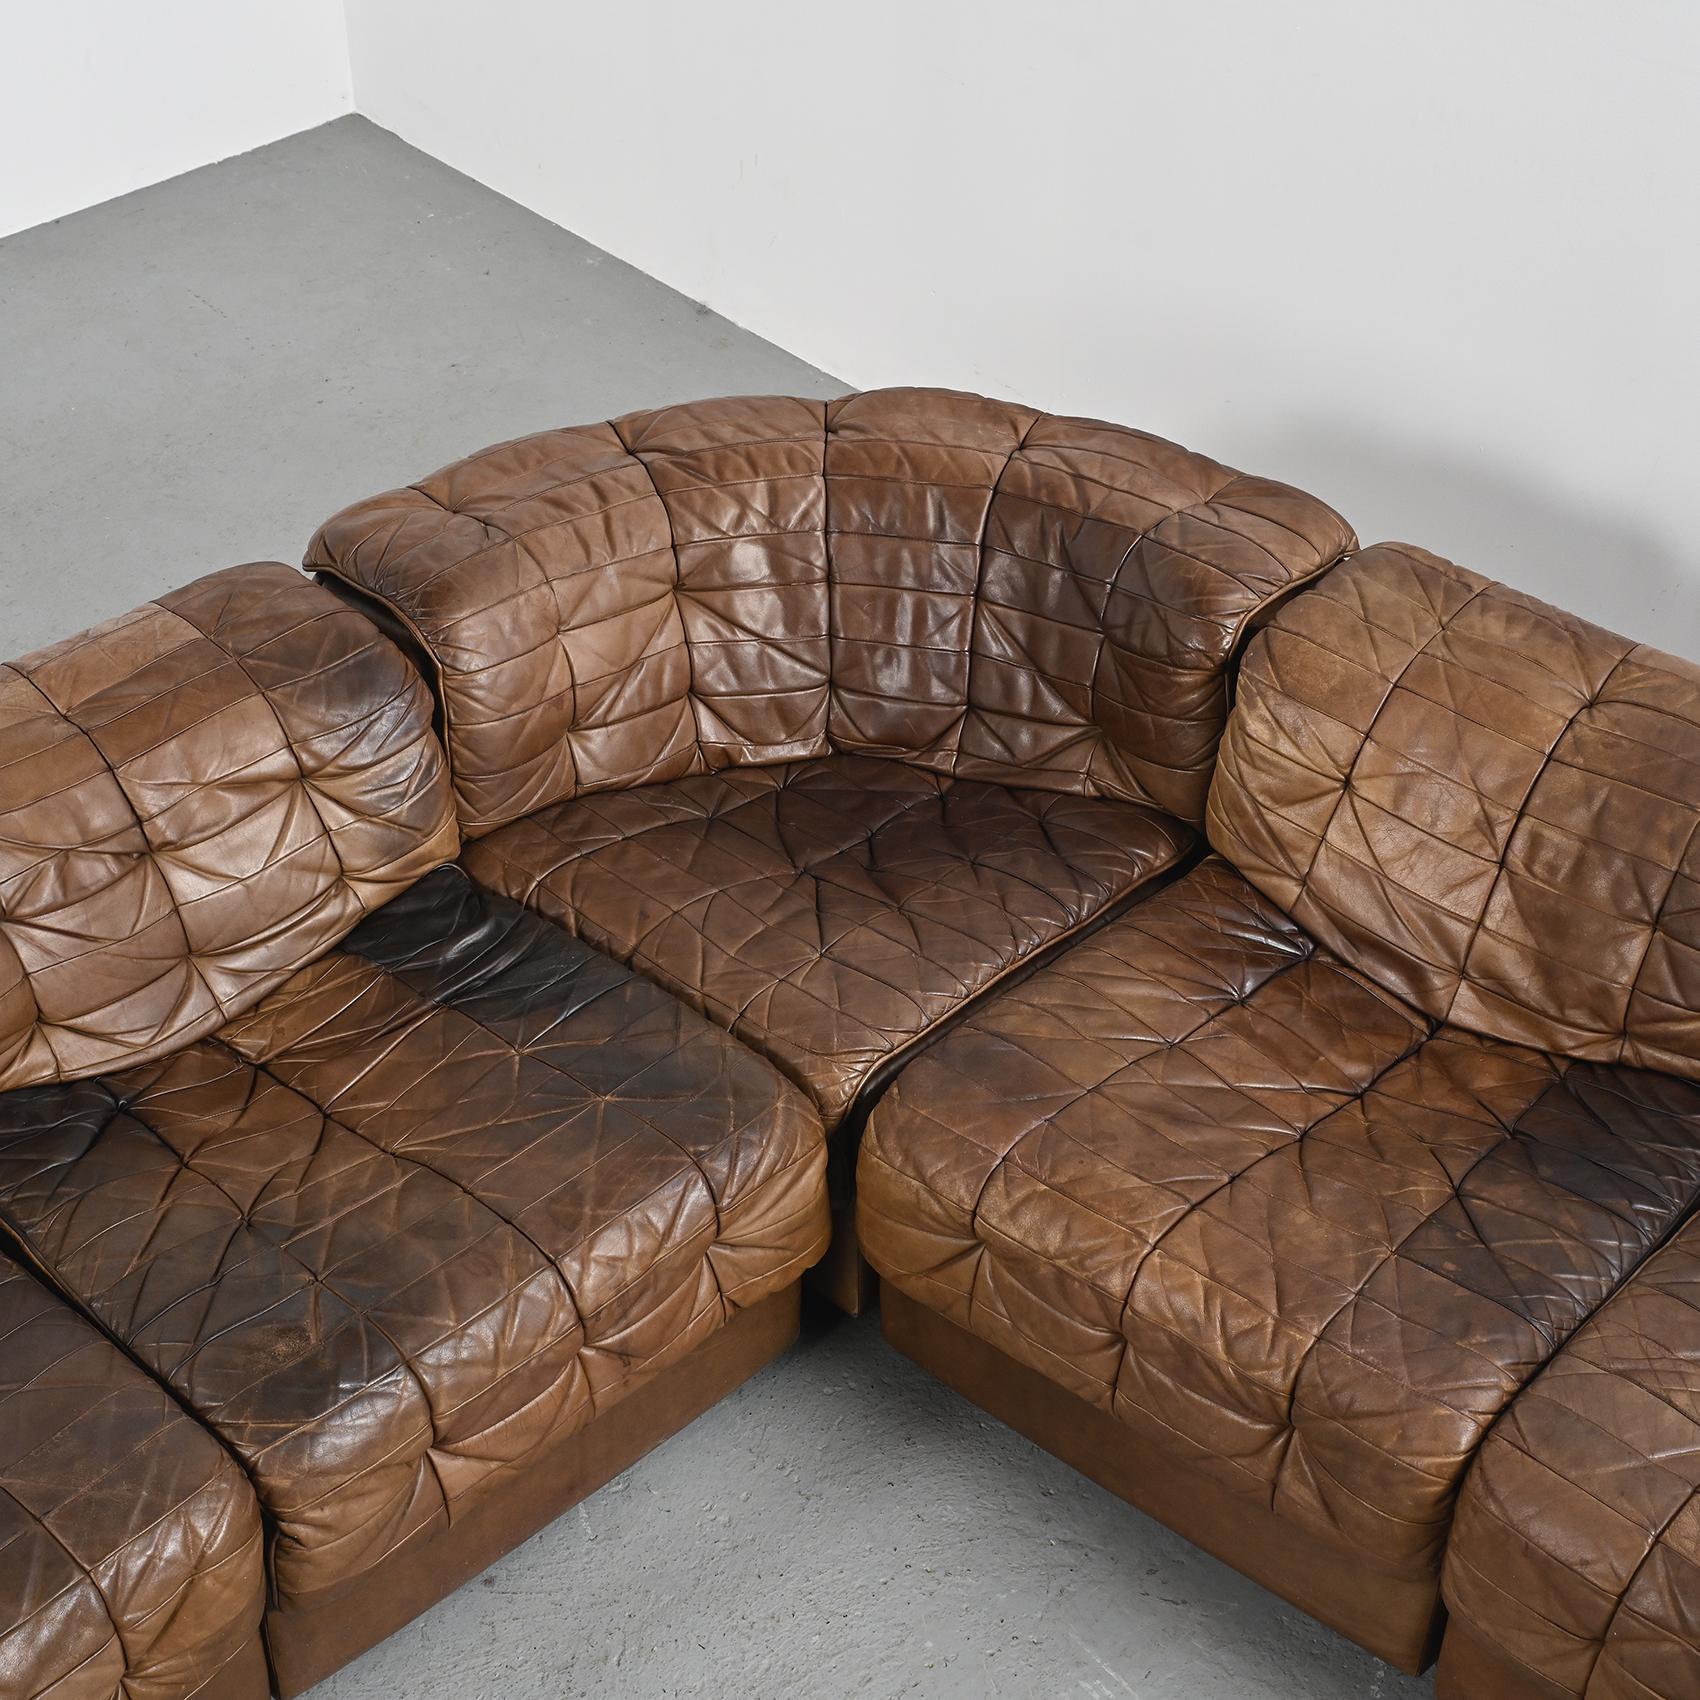 Modular DS 11 leather sofa, by the Swiss manufacturer De SEDE, dating from the 70s.

The set is made of high quality leather, crafted by hand in the appearance of a patchwork and consists of six seating elements including two corner seats in order